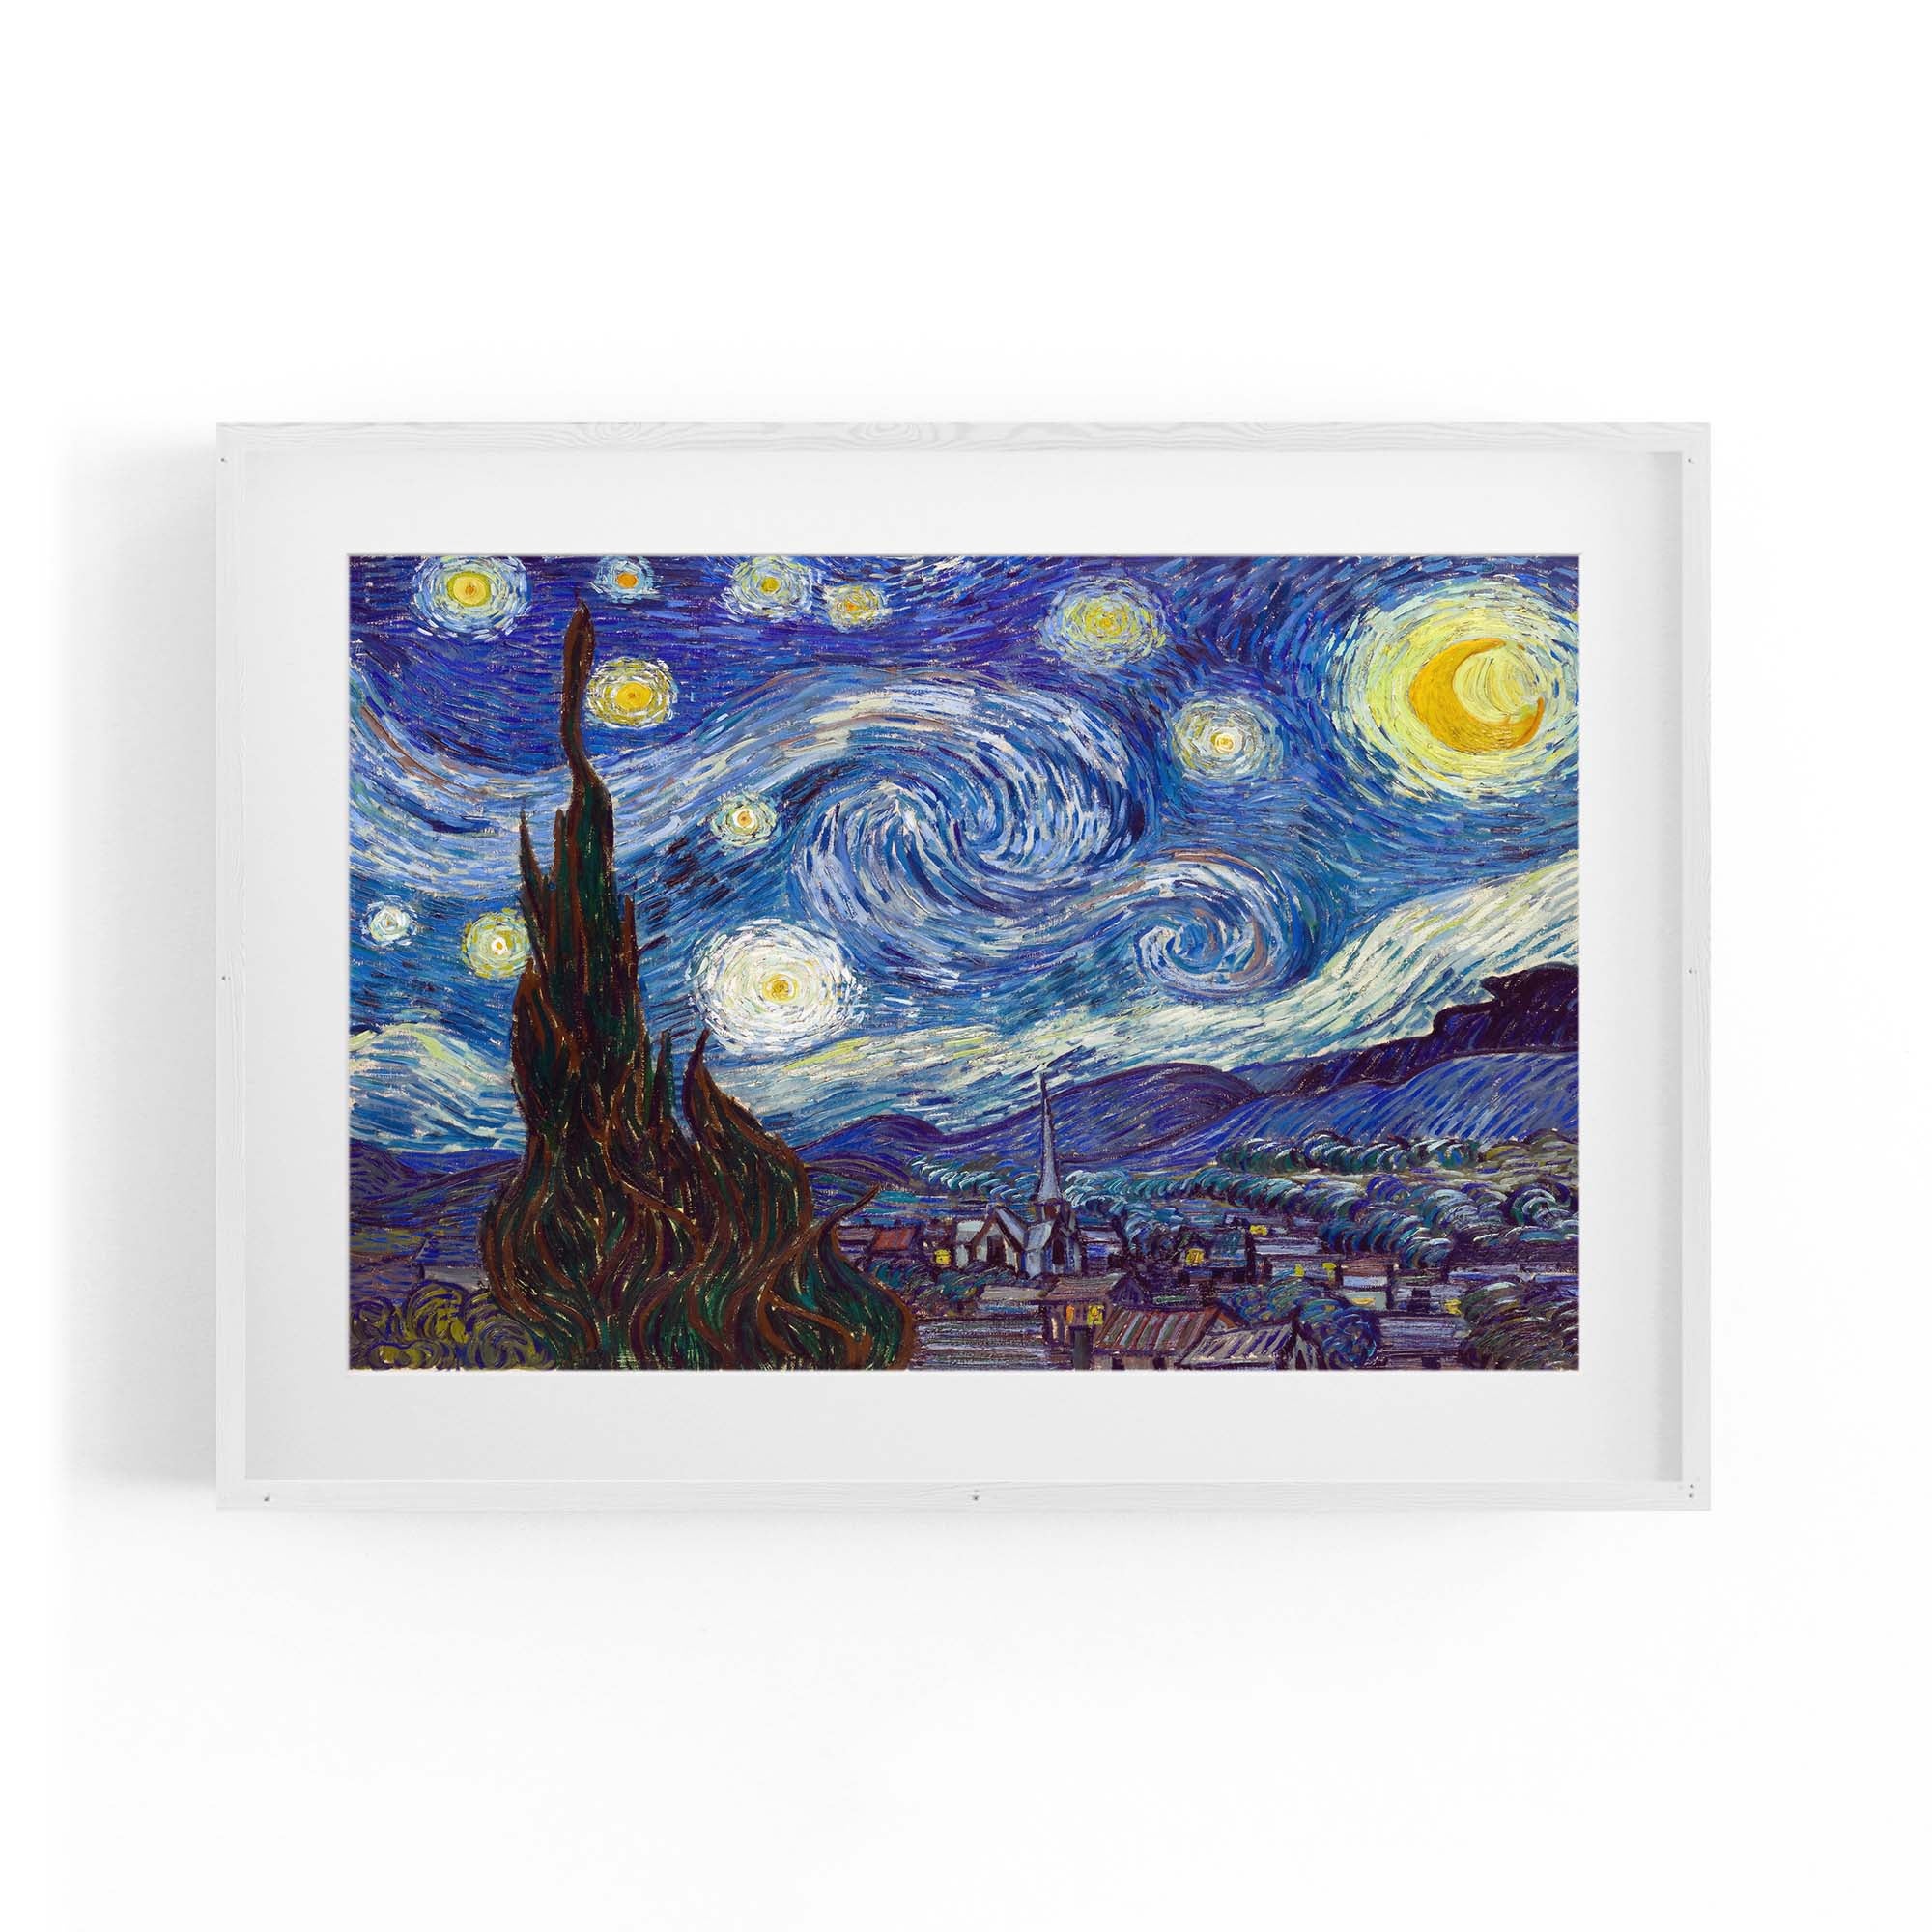 Starry Night by Vincent Van Gogh Painting Wall Art | Buy Posters ...